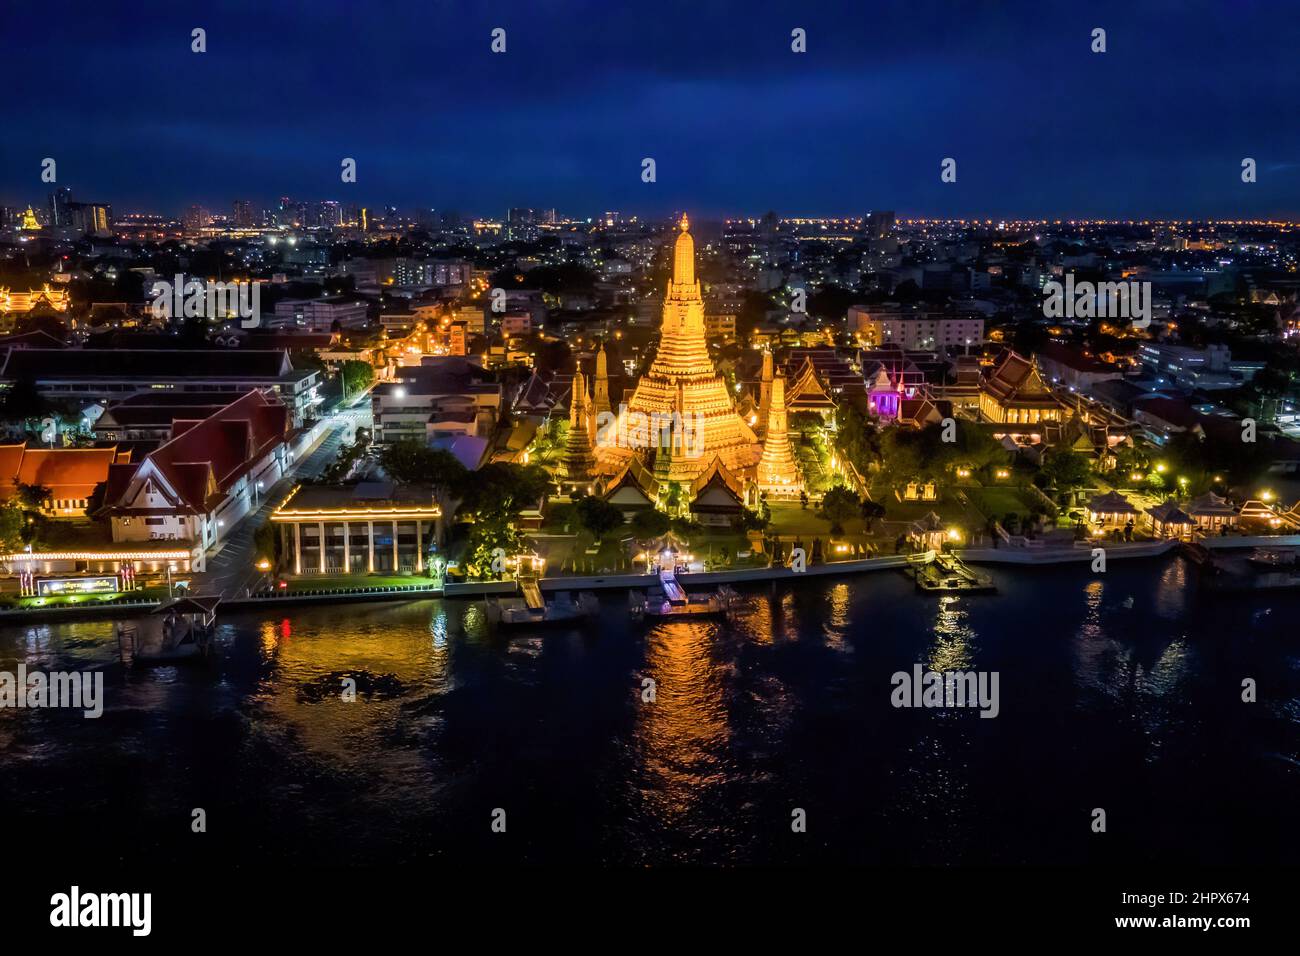 (EDITOR'S NOTE: Image taken with drone)Aerial view of Wat Arun, The Temple of Dawn, in Bangkok. Two of Thailand's most famous cultural heritage sites and tourist attractions, Wat Arun (Temple of Dawn) and The Grand Palace, are illuminated at night along the Chao Praya River in Bangkok. The Thai Government recently announced eased entry requirements for international tourists visiting Thailand amidst a surge in the Omicron variant of COVID-19 throughout the country, with cases topping 20,000 reported infections per day. Stock Photo